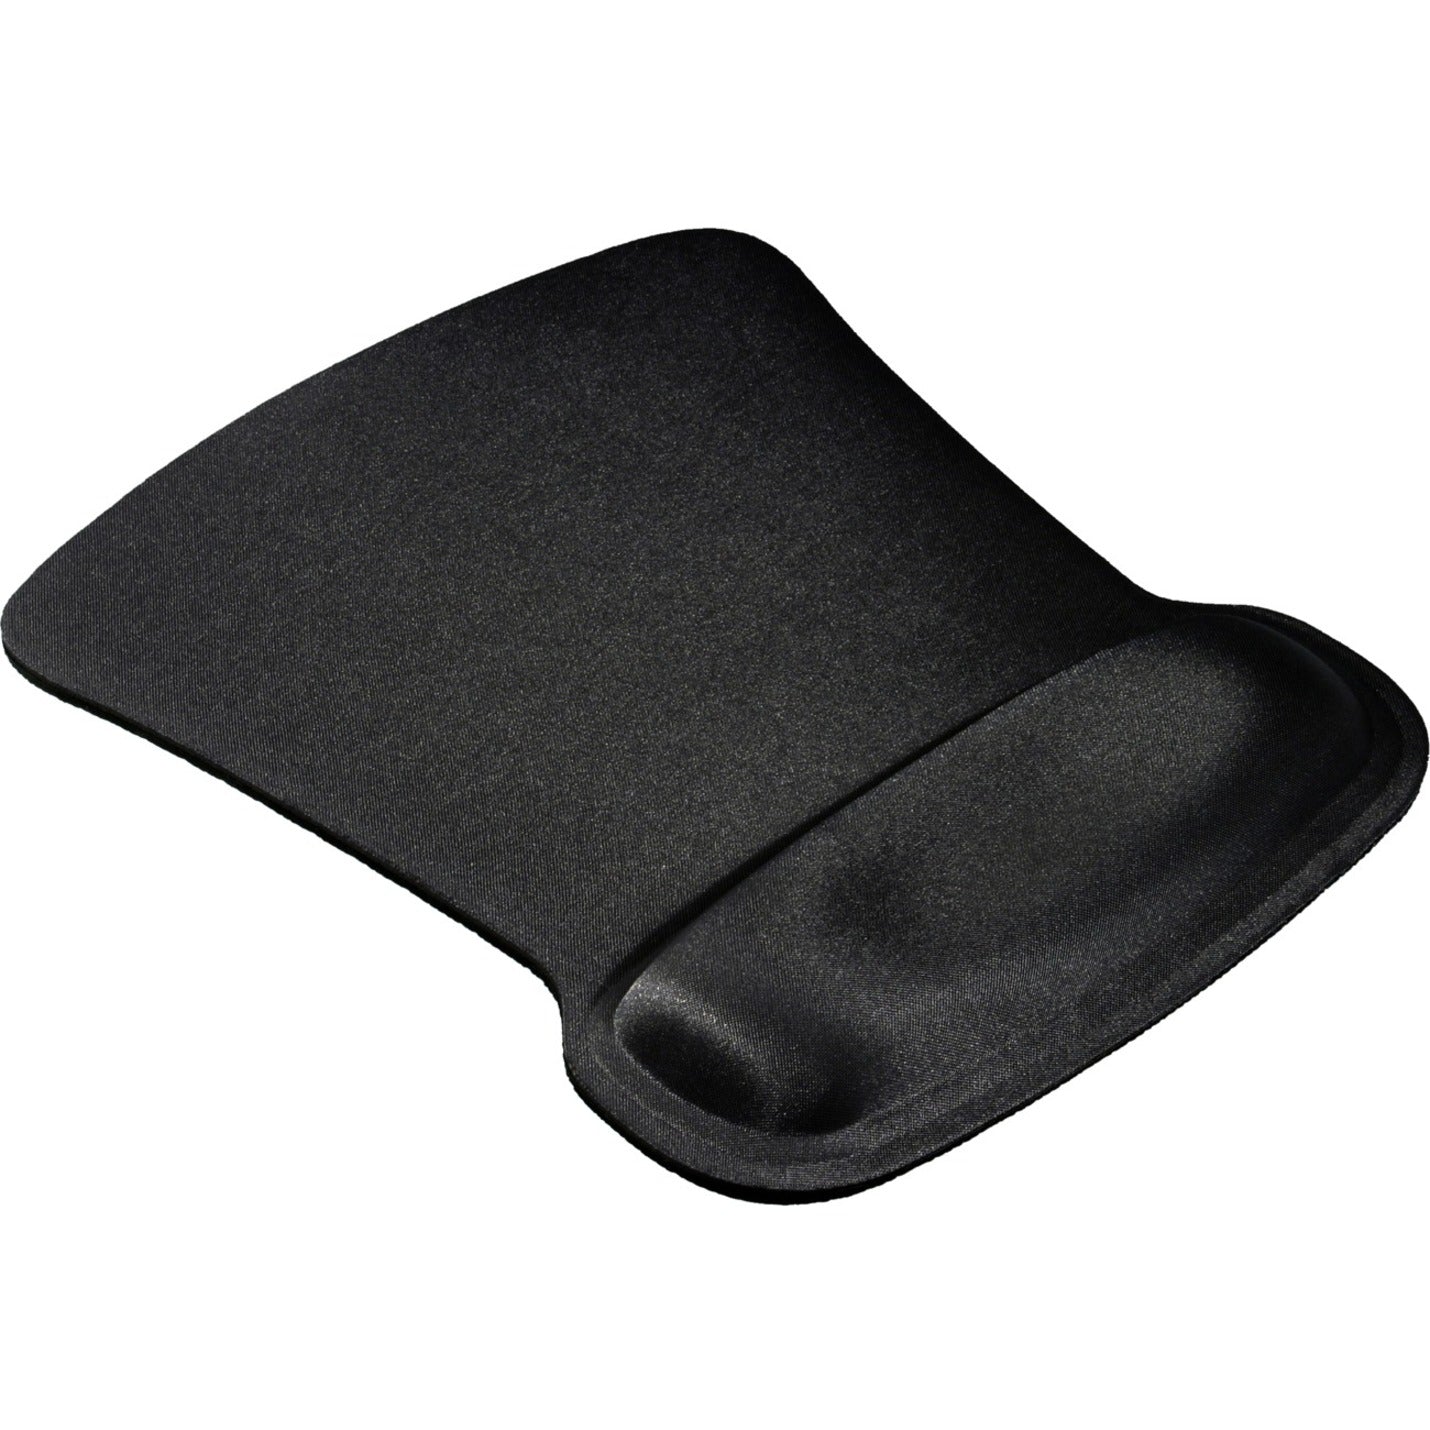 Allsop 30191 Ergoprene Gel Mouse Pad with Wrist Rest - Black, Smooth and Comfortable